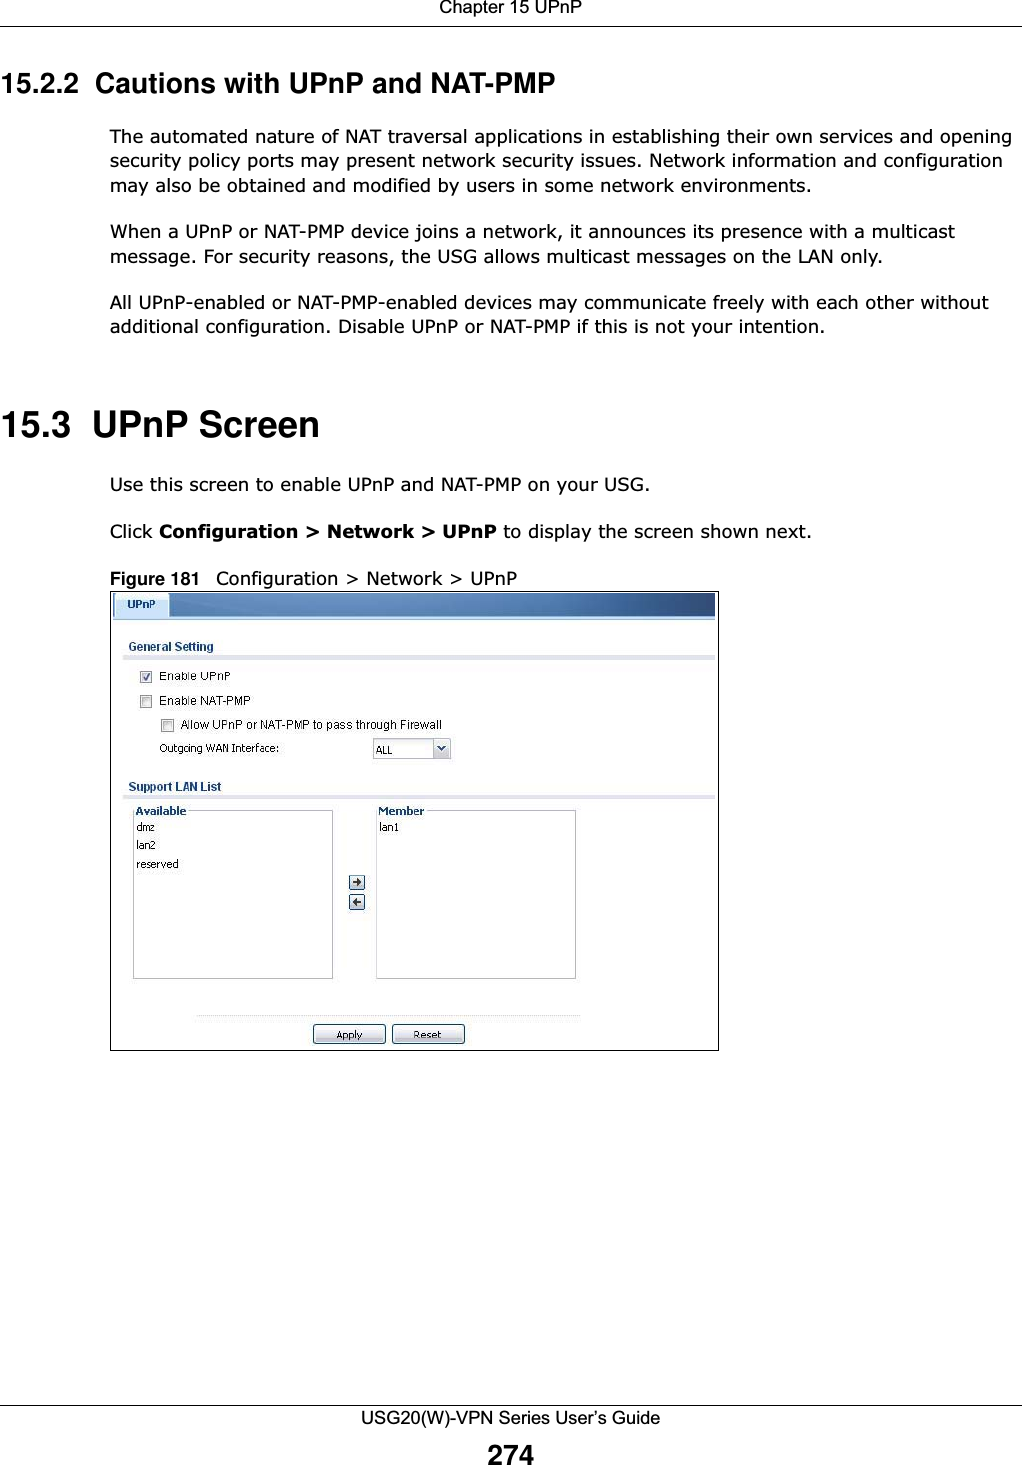 Chapter 15 UPnPUSG20(W)-VPN Series User’s Guide27415.2.2  Cautions with UPnP and NAT-PMPThe automated nature of NAT traversal applications in establishing their own services and opening security policy ports may present network security issues. Network information and configuration may also be obtained and modified by users in some network environments. When a UPnP or NAT-PMP device joins a network, it announces its presence with a multicast message. For security reasons, the USG allows multicast messages on the LAN only.All UPnP-enabled or NAT-PMP-enabled devices may communicate freely with each other without additional configuration. Disable UPnP or NAT-PMP if this is not your intention. 15.3  UPnP Screen Use this screen to enable UPnP and NAT-PMP on your USG.Click Configuration &gt; Network &gt; UPnP to display the screen shown next. Figure 181   Configuration &gt; Network &gt; UPnP